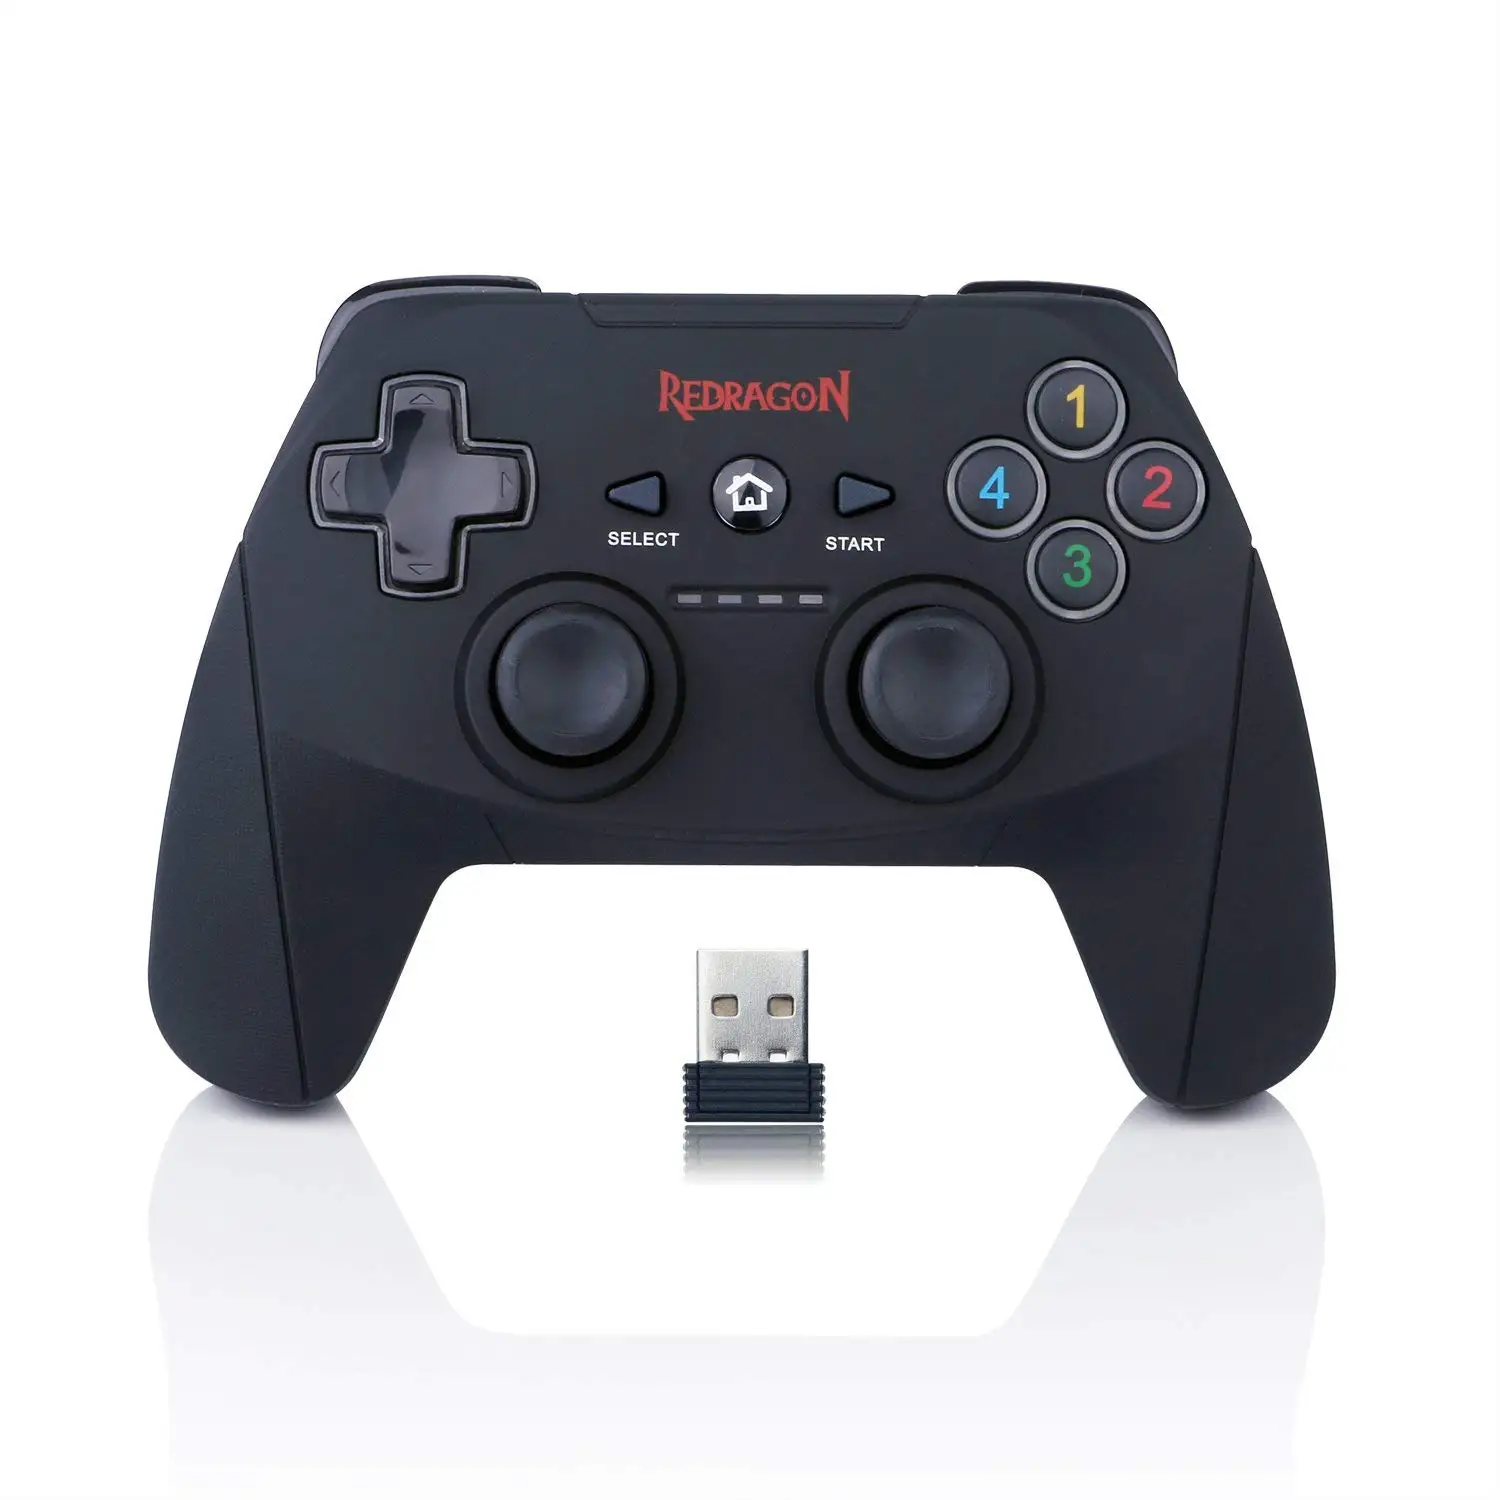 High Quality Redragon G808 2.4G USB Wireless Joystick Gamepad Gaming Controller For PC PS3